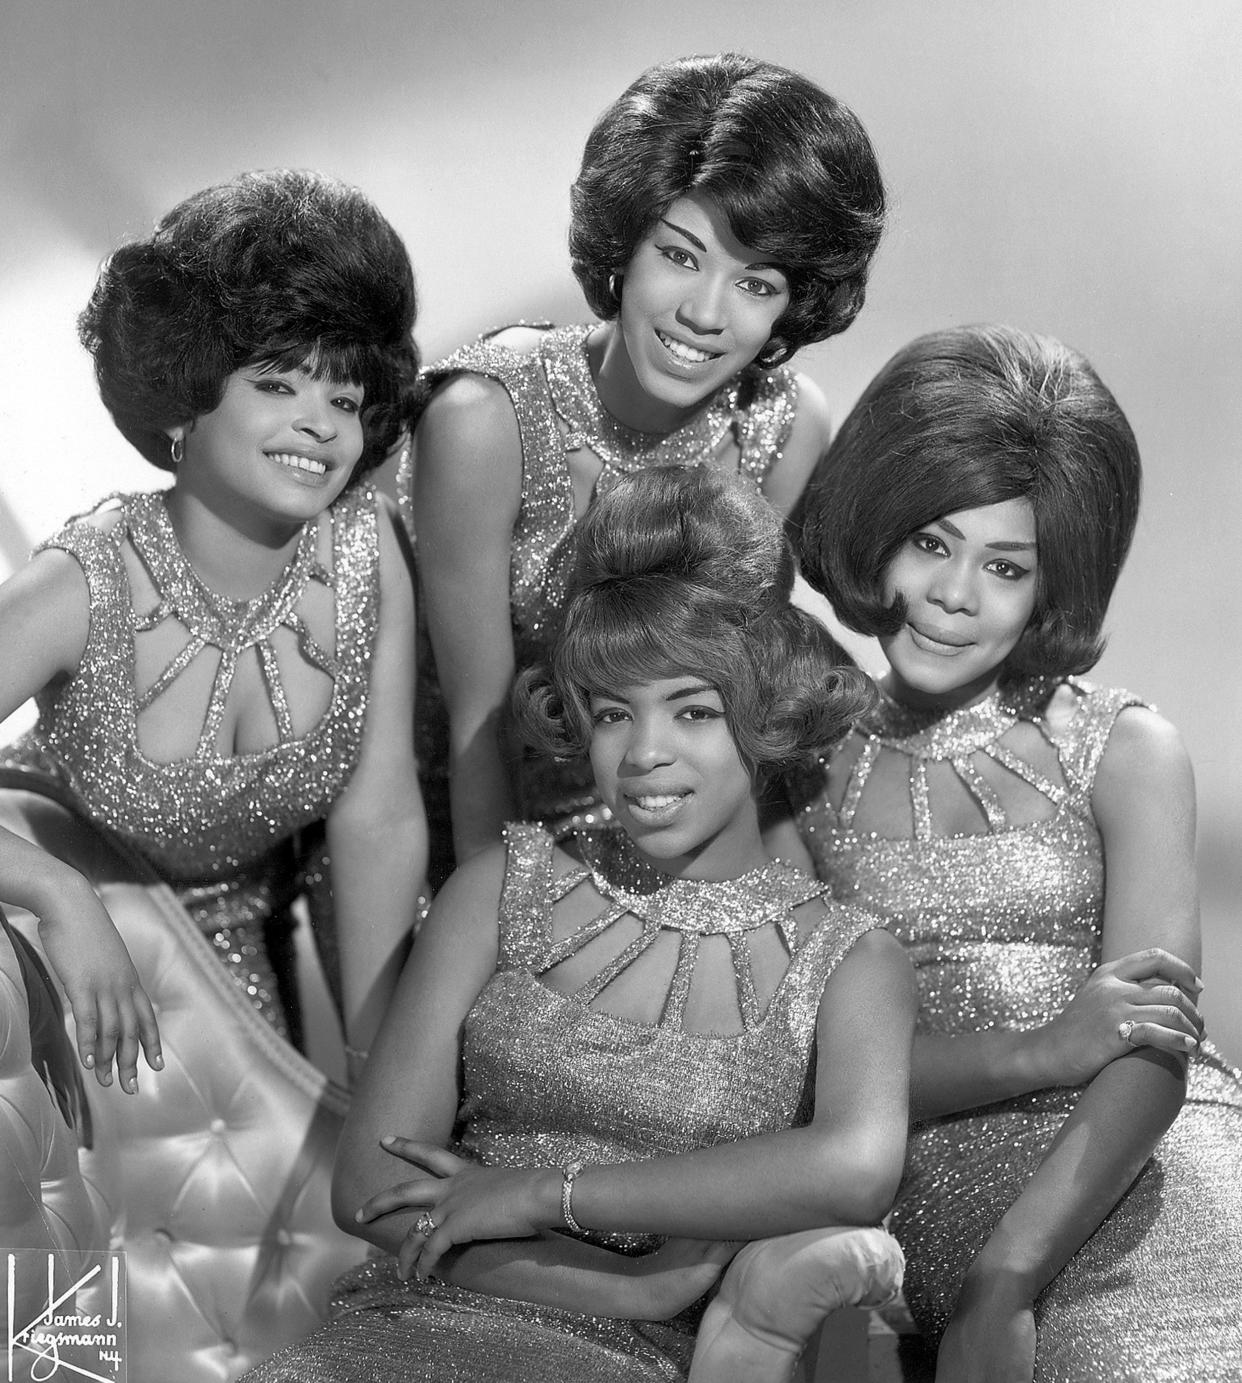 Marvelettes singer Wanda Young, left, died Dec. 15. Fellow Motown performers remembered her for her distinctive voice, wit and stage presence.